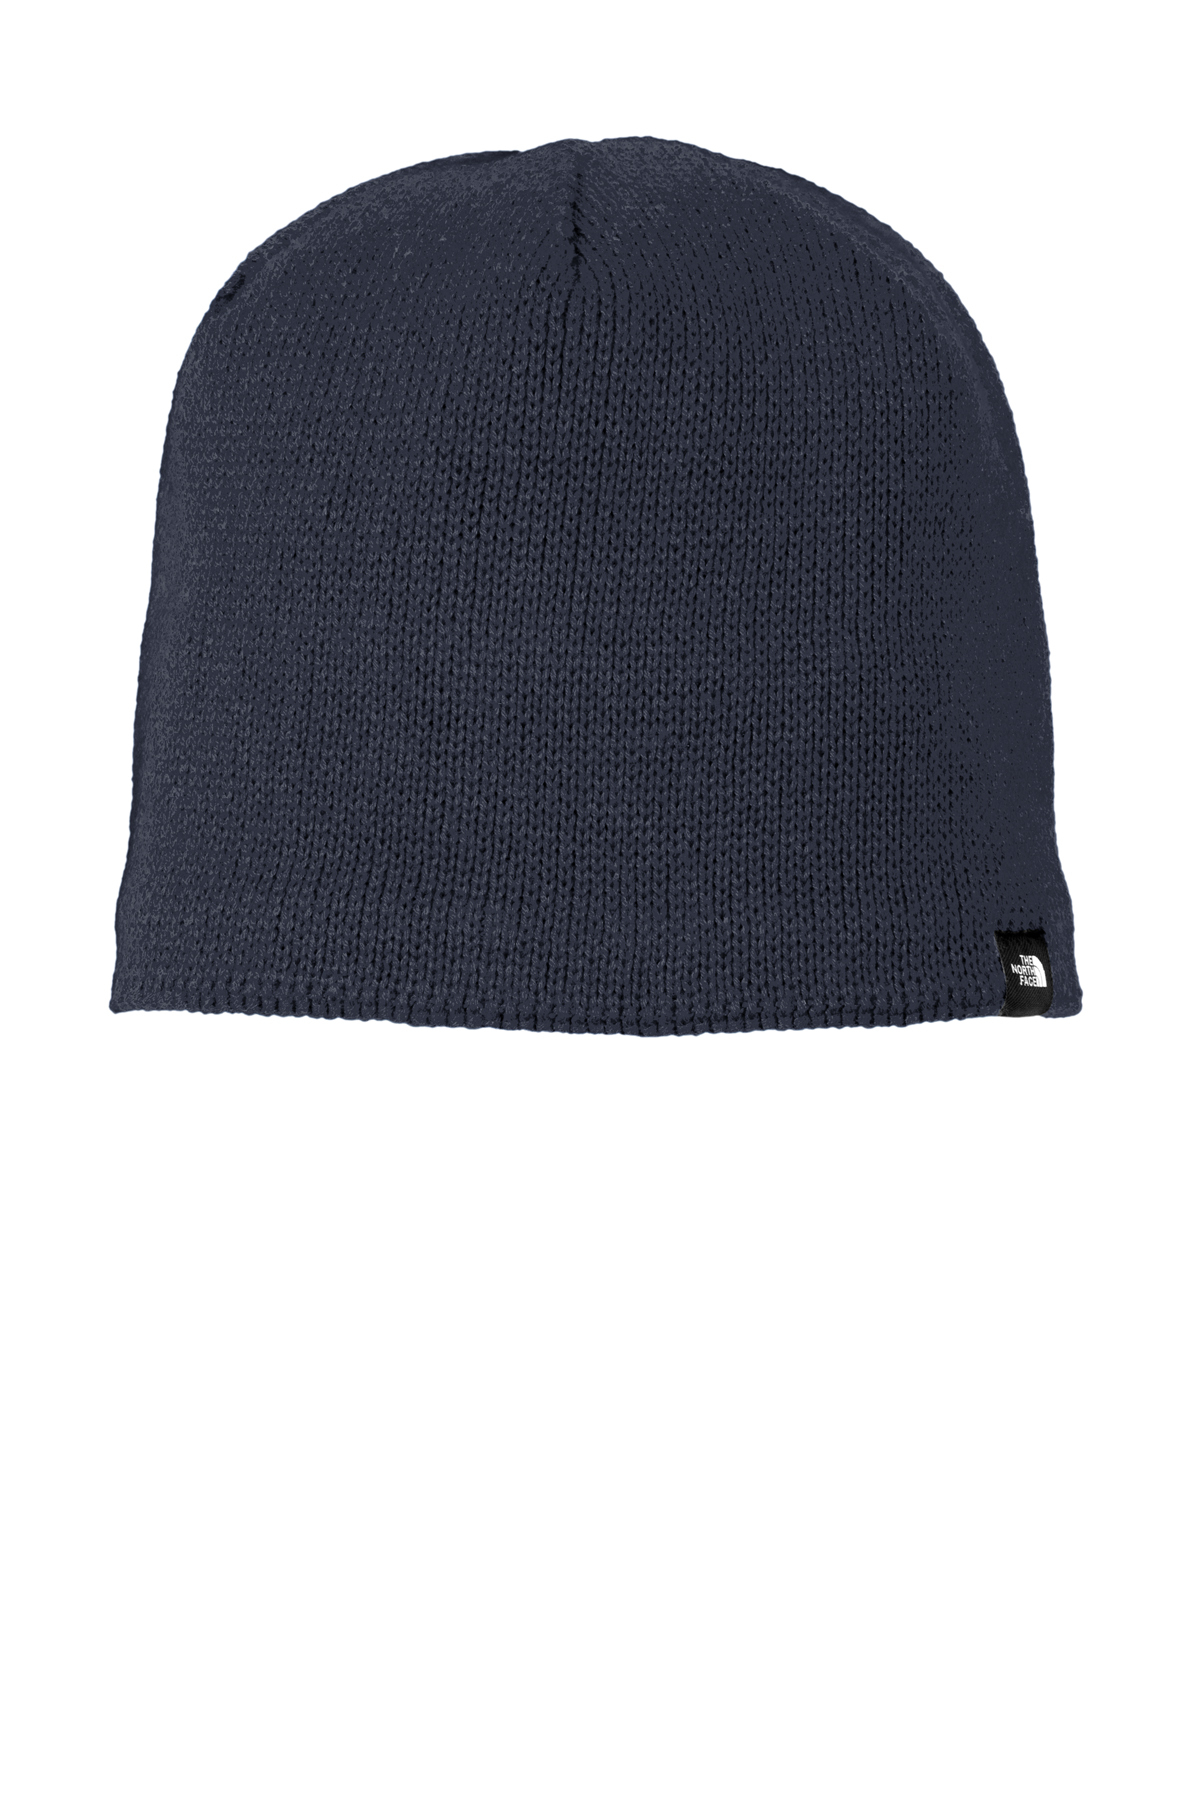 | SanMar Face The Beanie | North Product Mountain